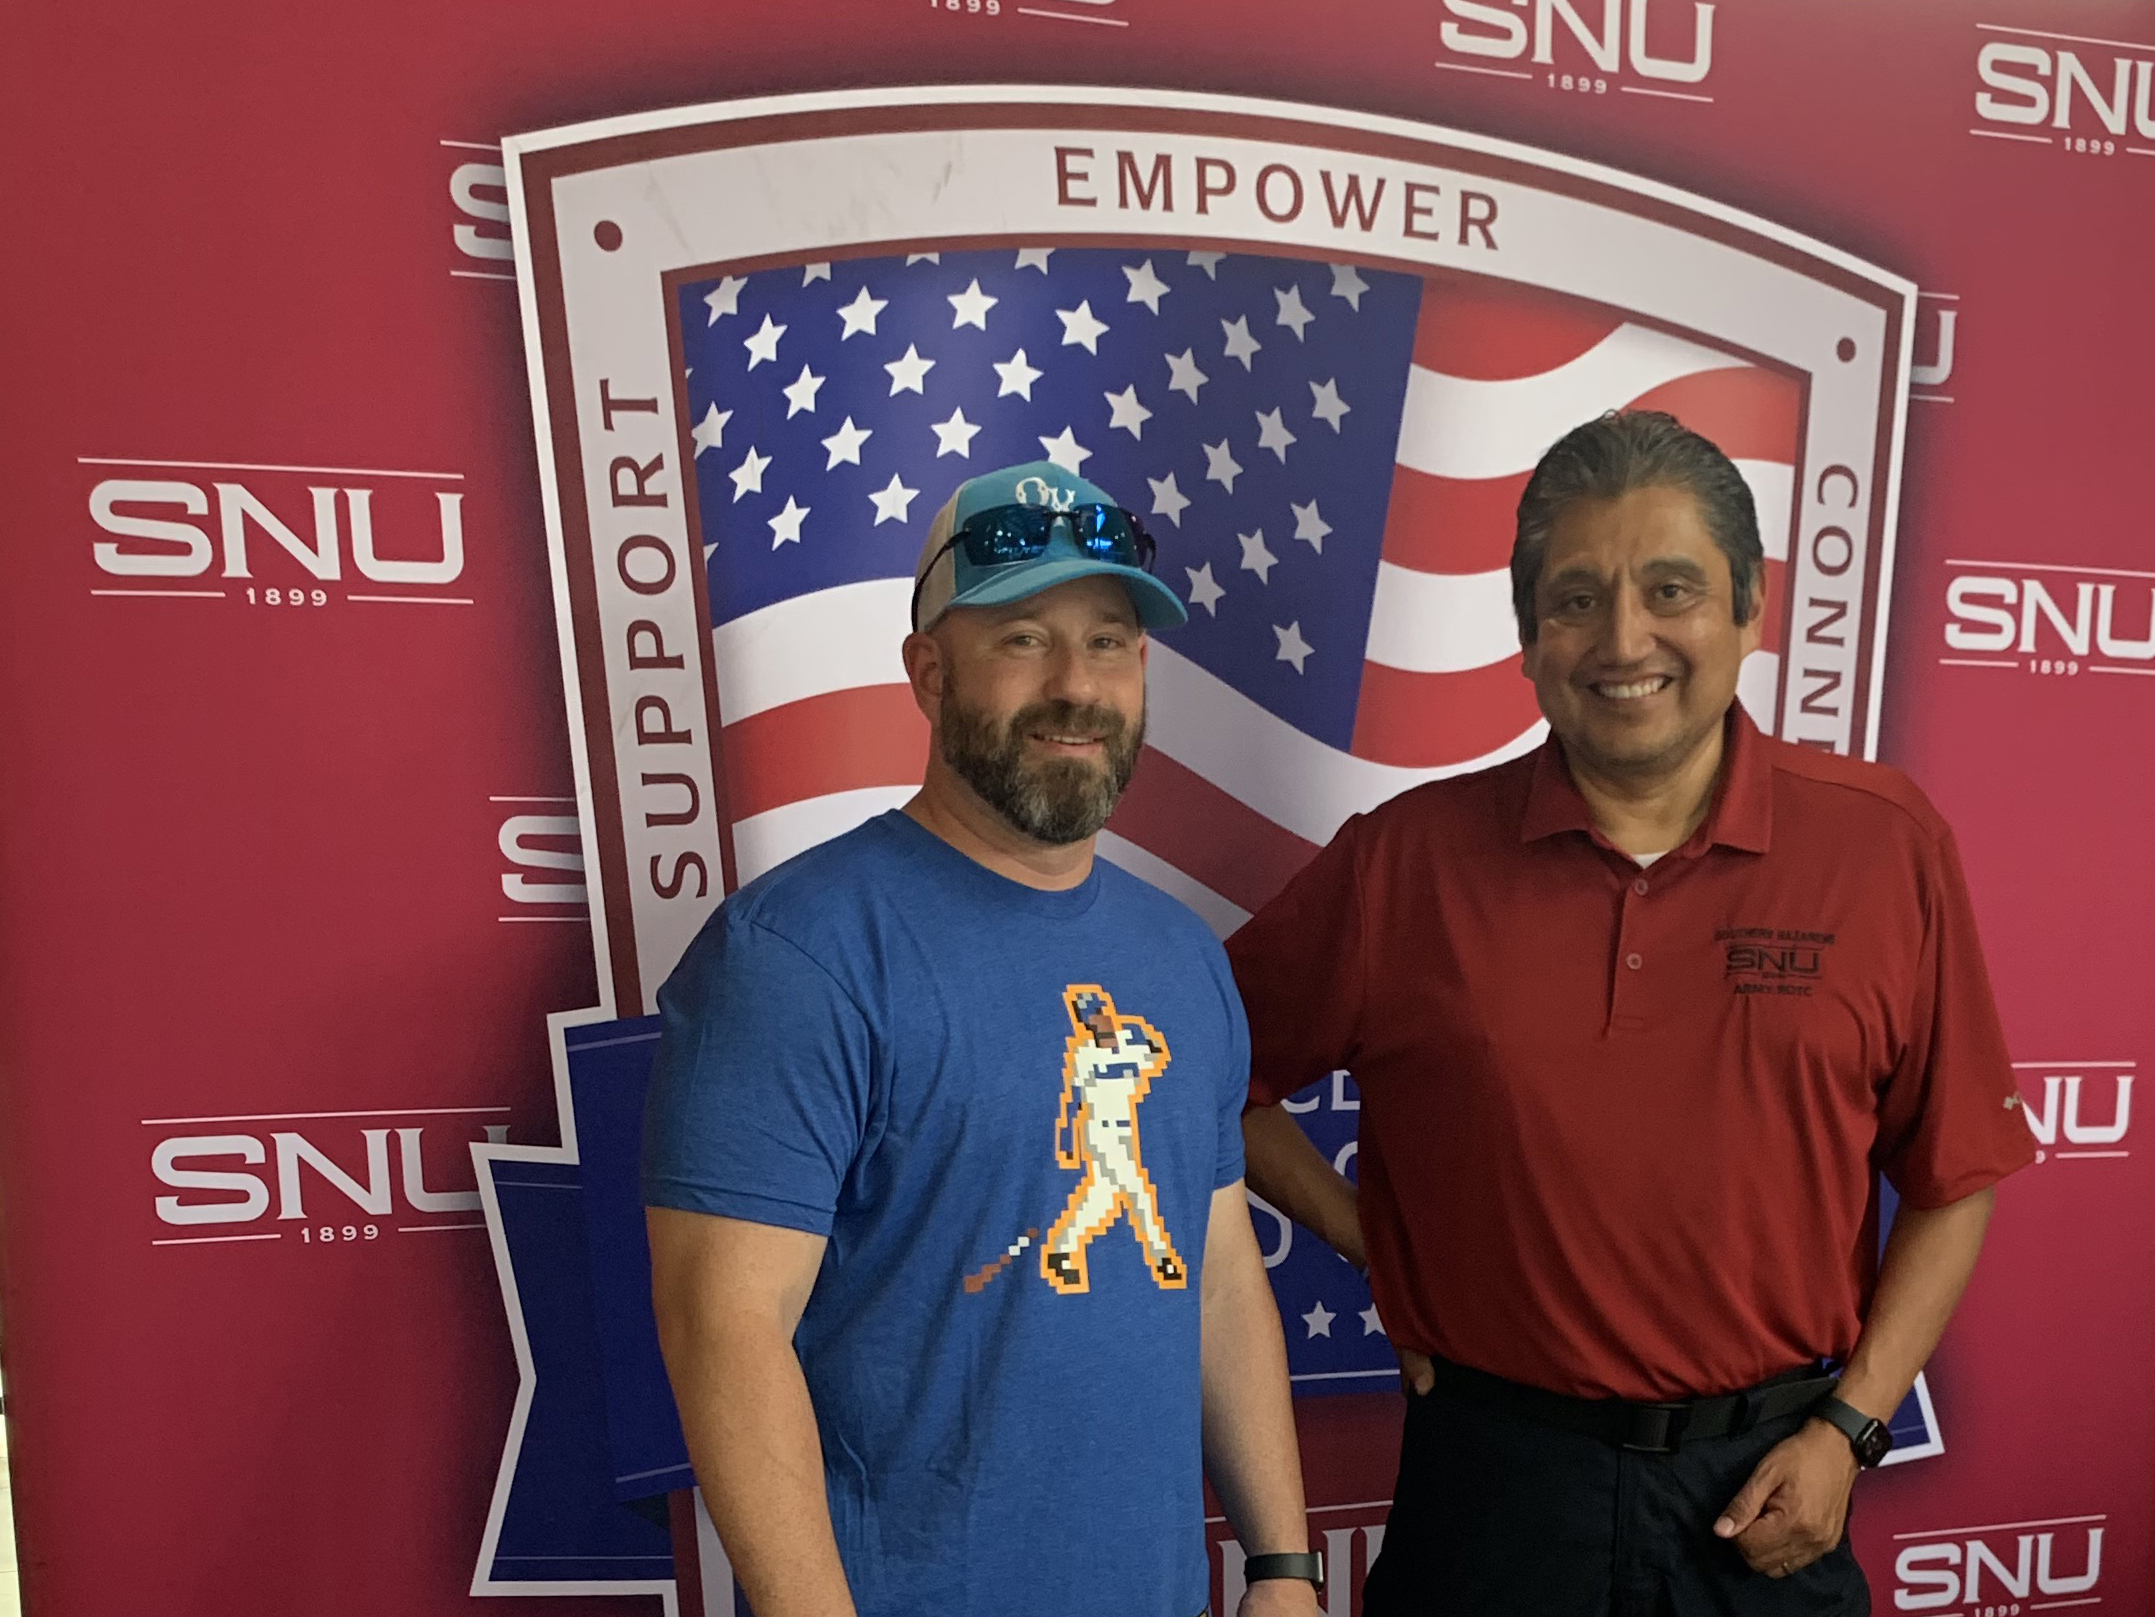 Air Force Veteran Pursues his Passions with Two Degrees from SNU